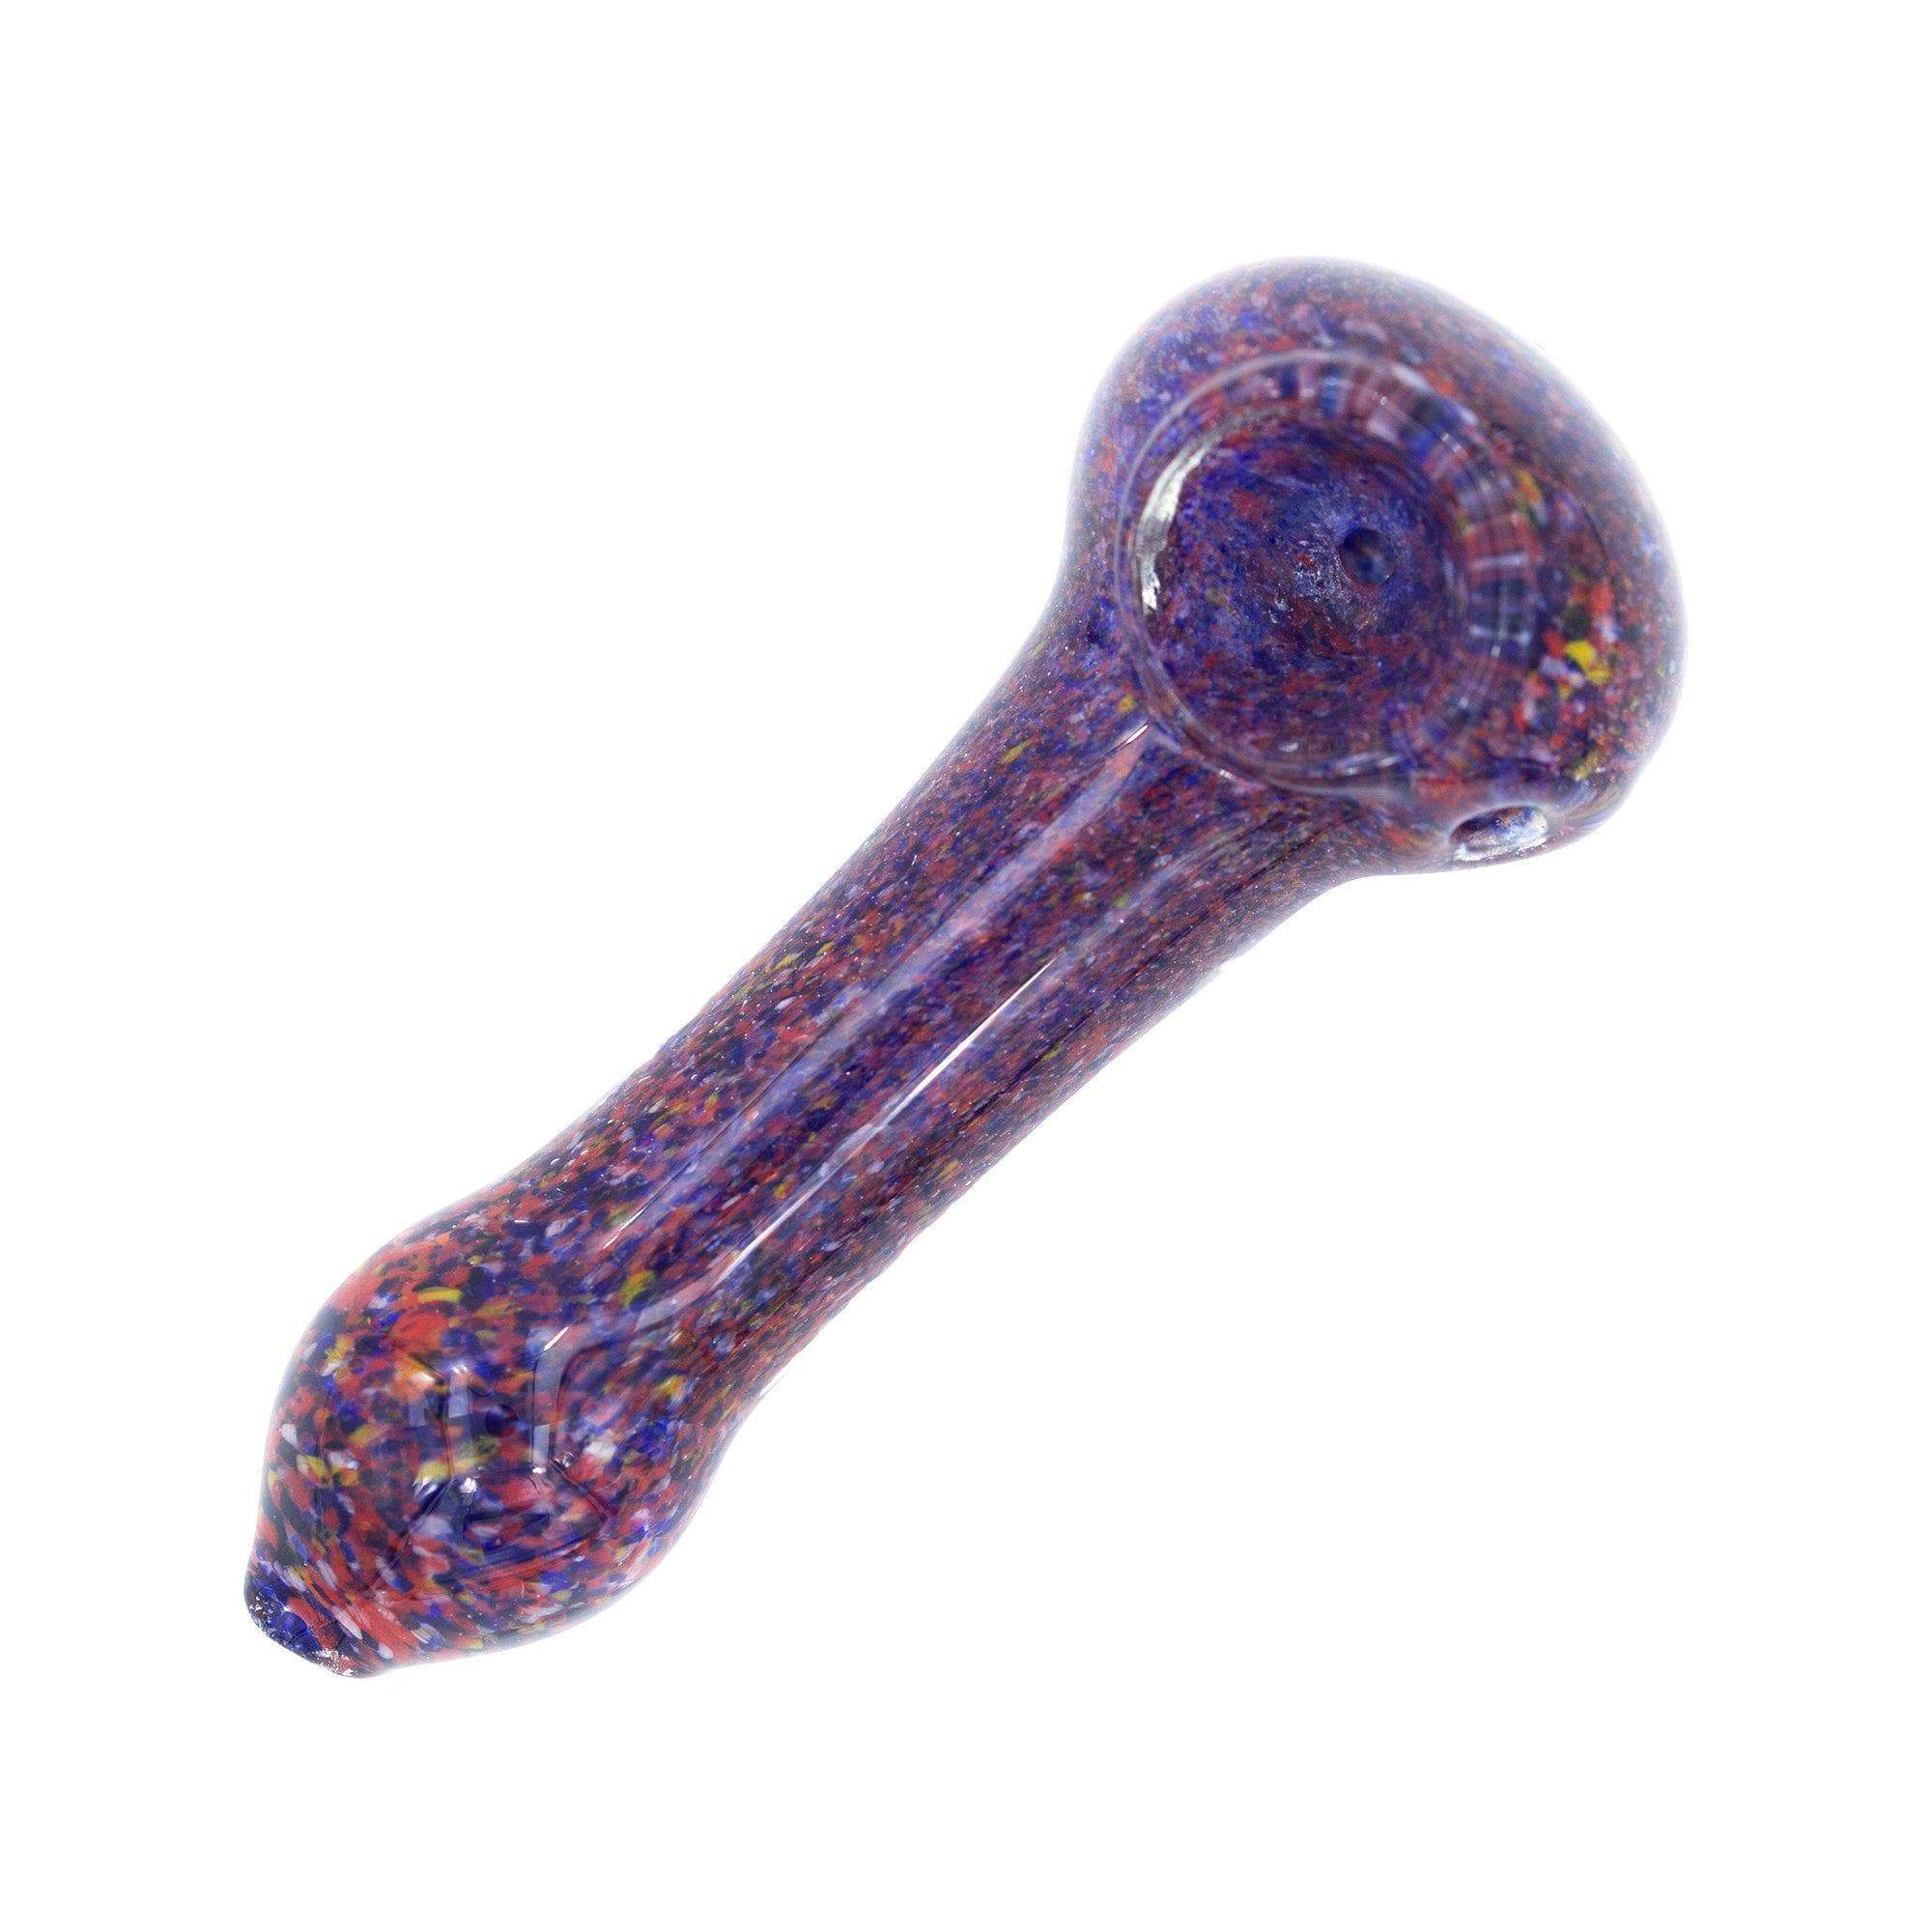 Purple Stylish 4-inch compact glass pipe smoking device with speckled marble-like design spoon shape